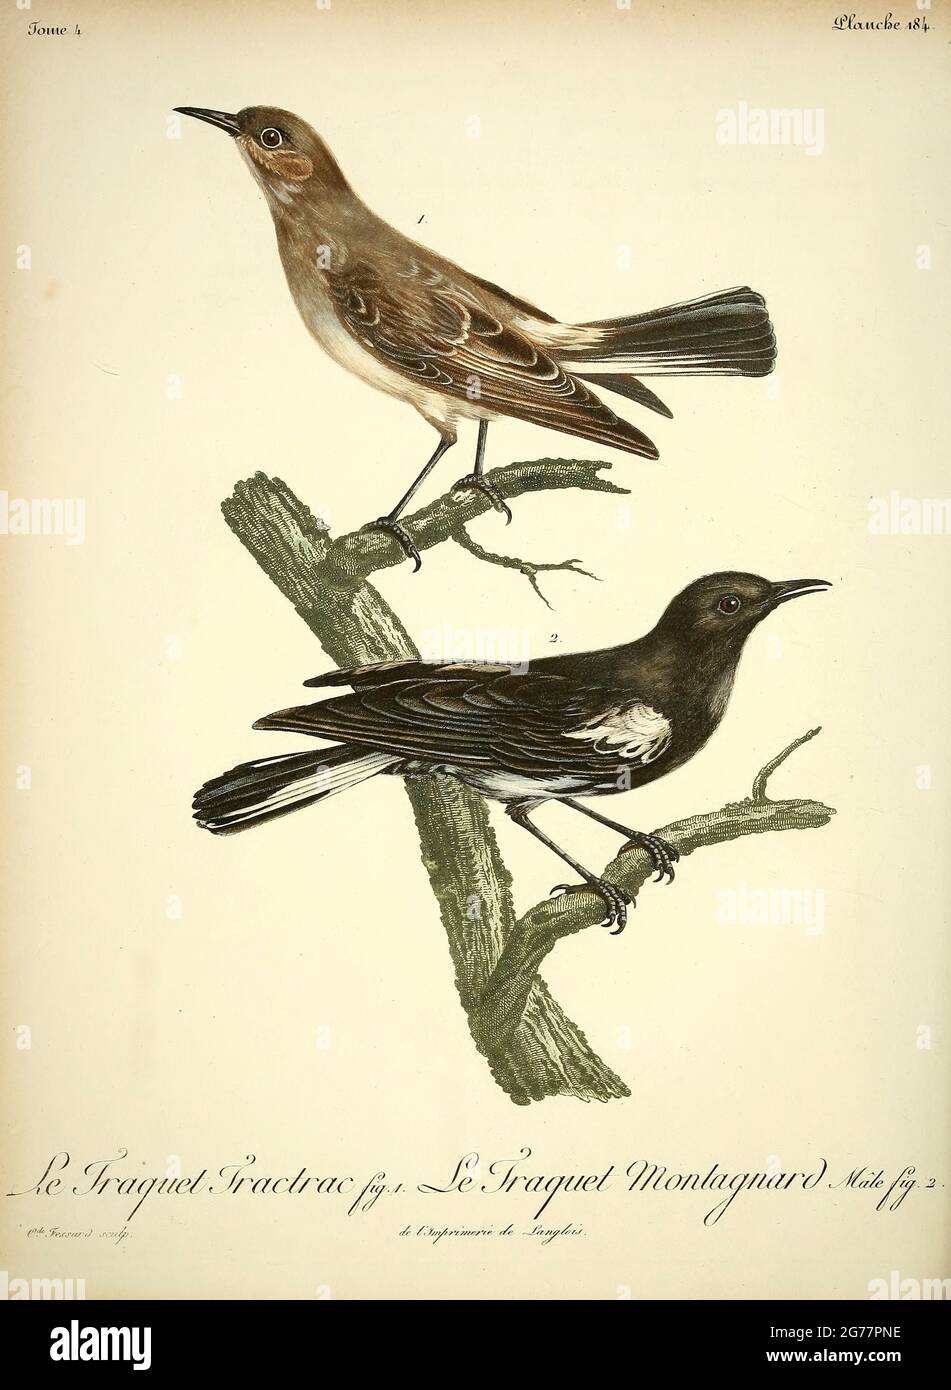 Traquet tractrac Emarginata tractrac - Tractrac Chat  and Traquet montagnard Myrmecocichla monticola - Mountain Wheatear from the Book Histoire naturelle des oiseaux d'Afrique [Natural History of birds of Africa] Volume 4, by Le Vaillant, Francois, 1753-1824; Publish in Paris by Chez J.J. Fuchs, libraire 1805 Stock Photo